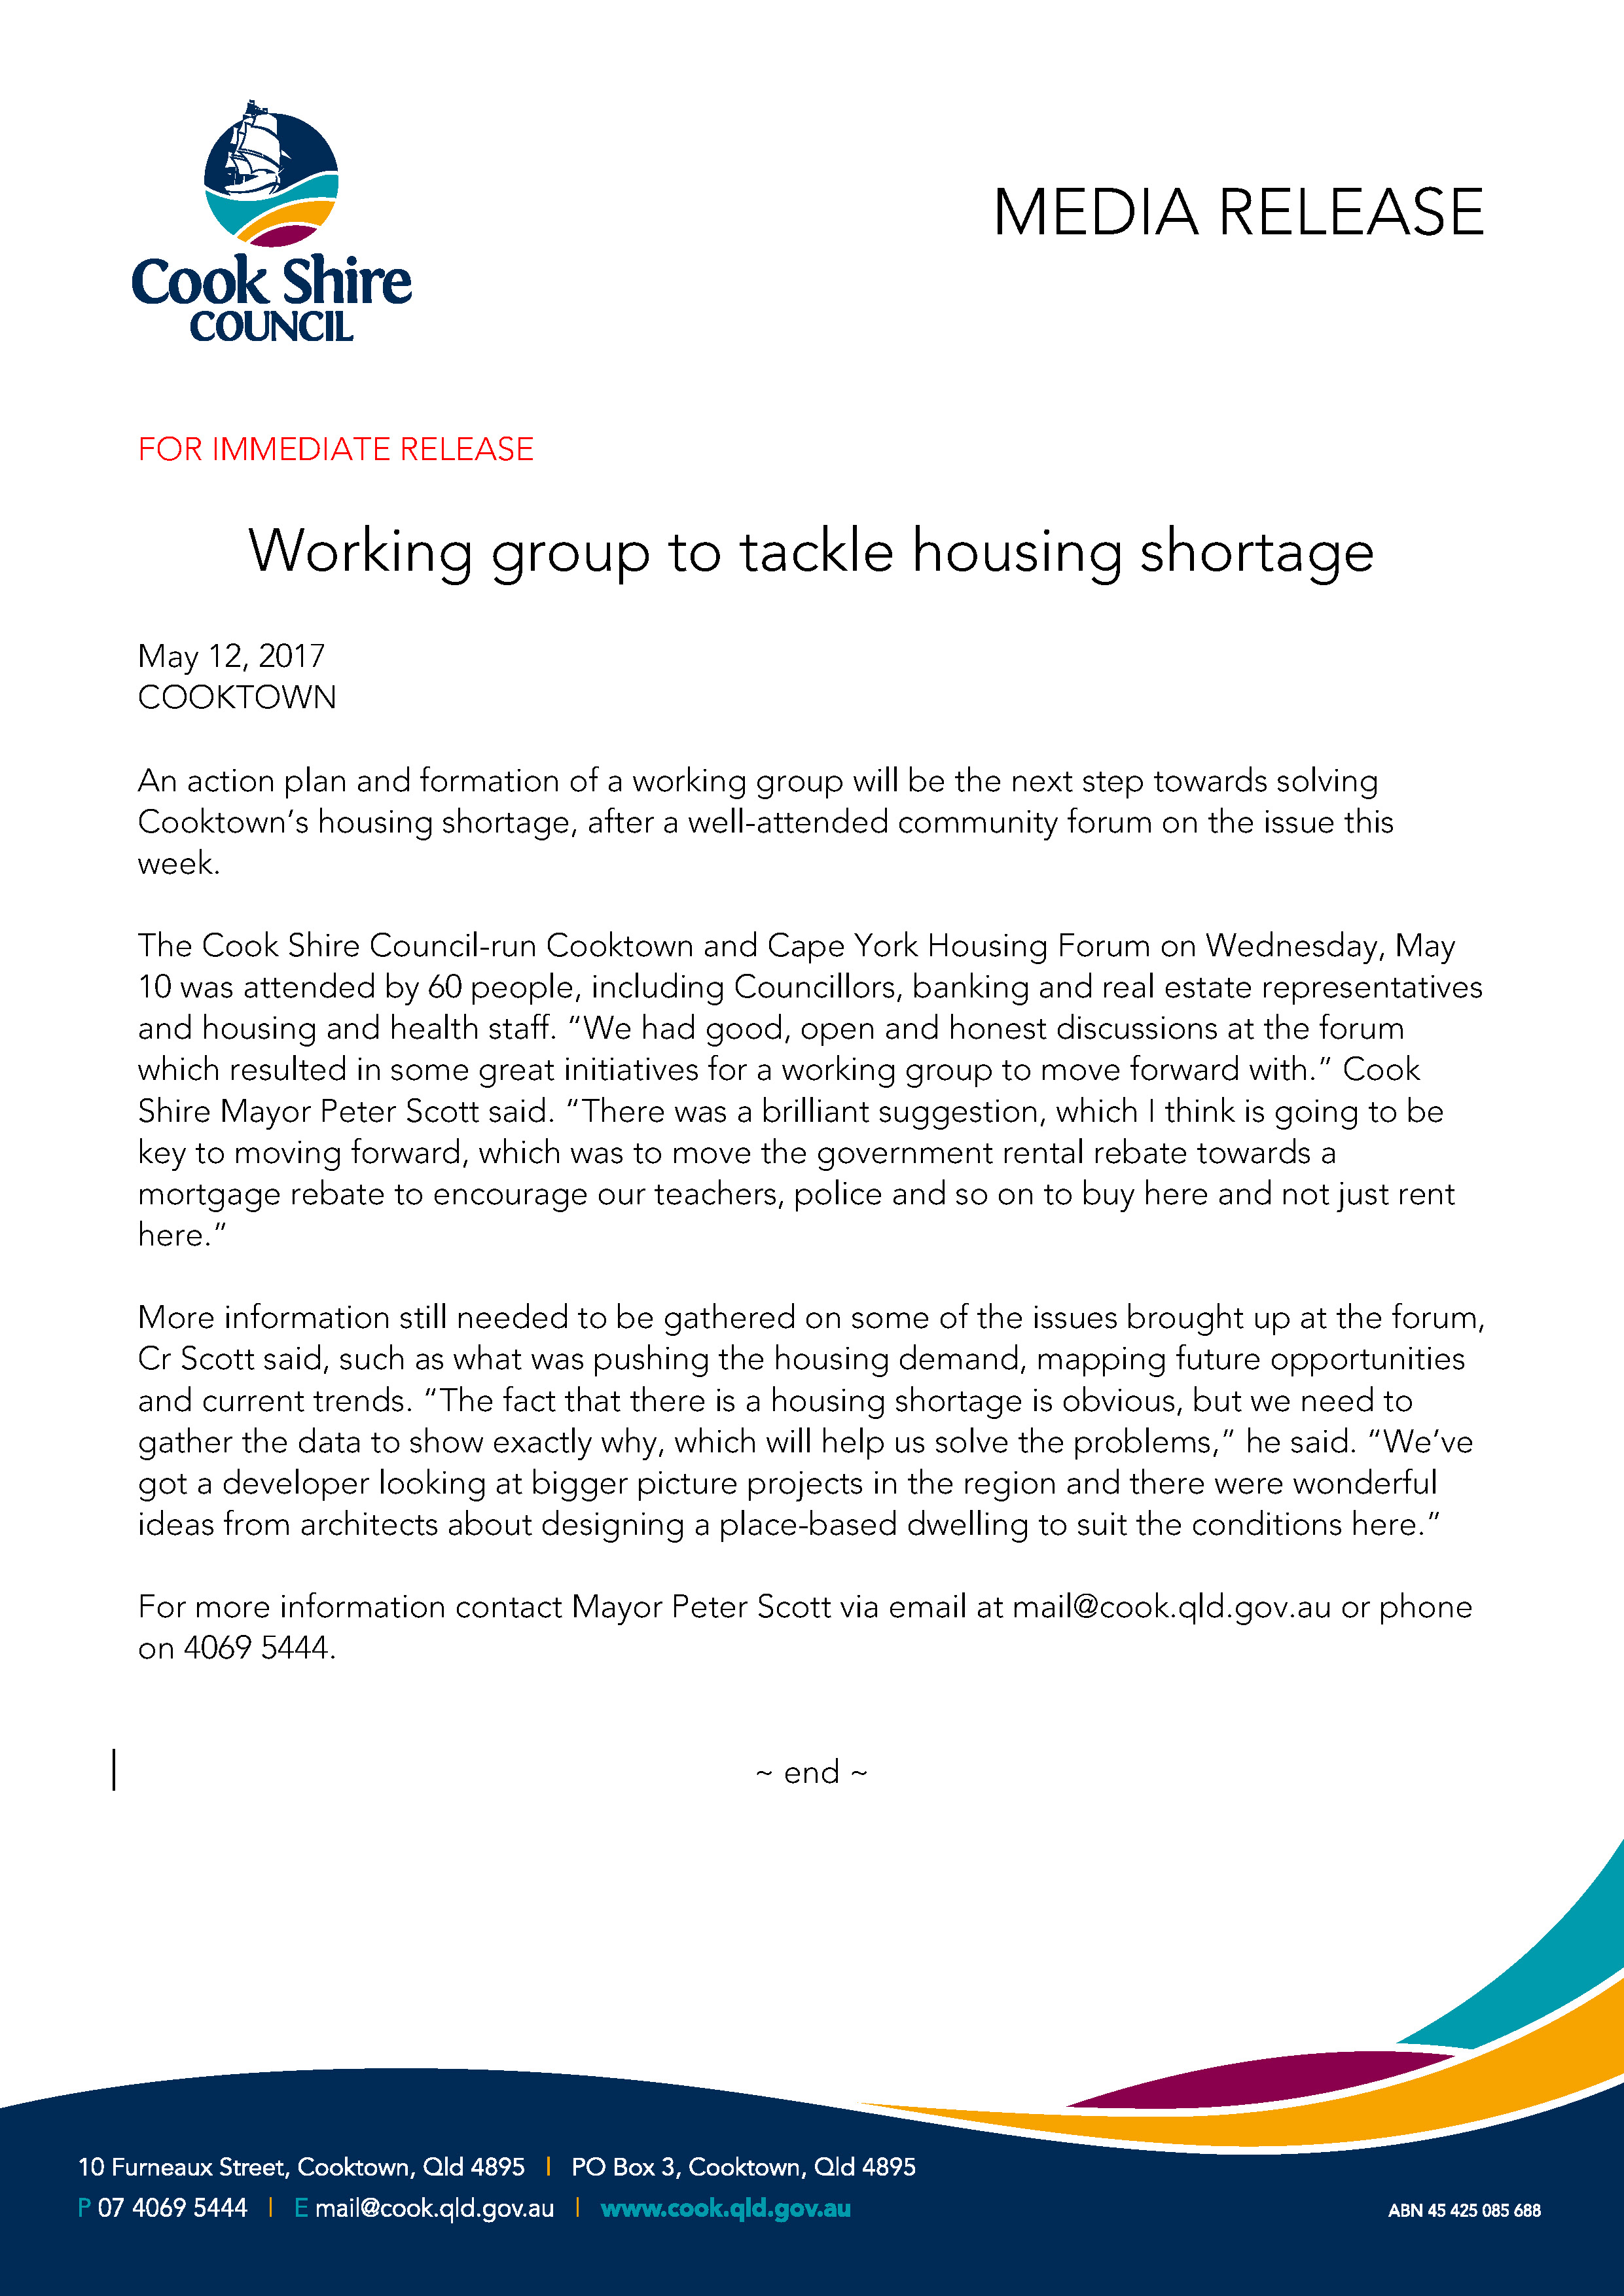 Working group to tackle housing shortage